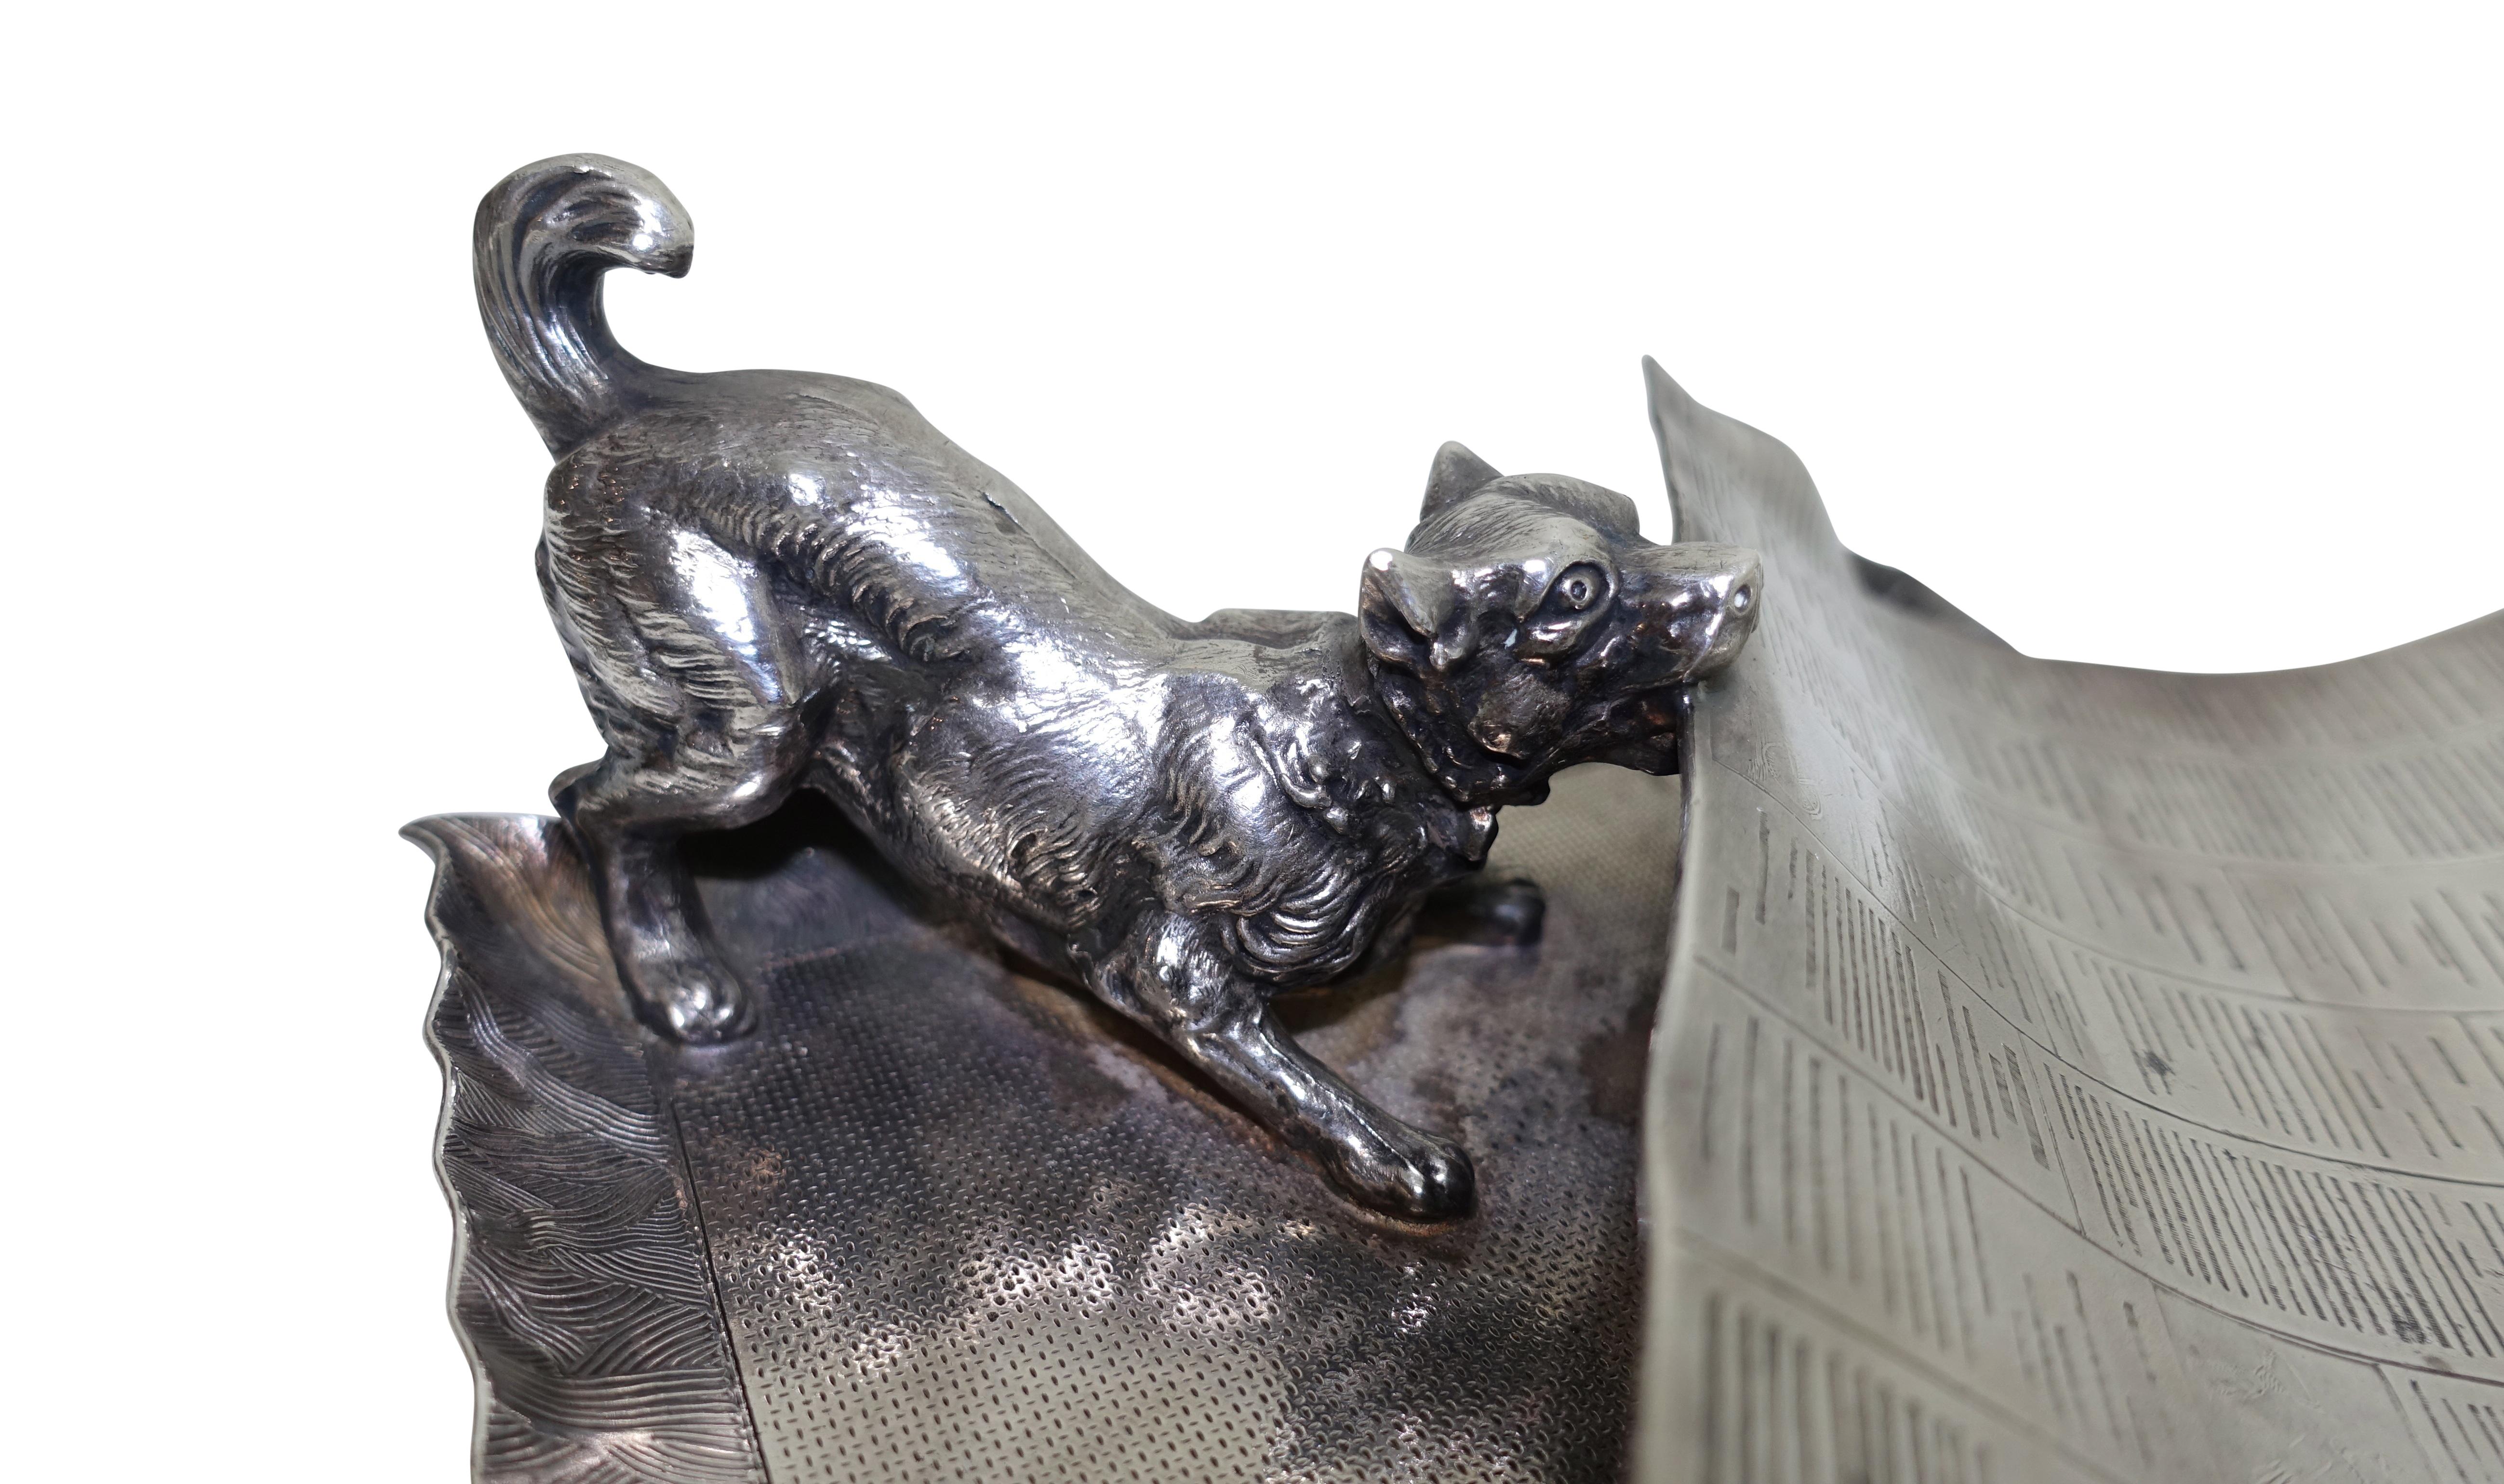 Charming antique silver plate calling card tray or business card receiver
A dog with a newspaper in his mouth
Made by the Pairpoint Mfg. Co., hallmarked on the underside,
late 19th century. 

 